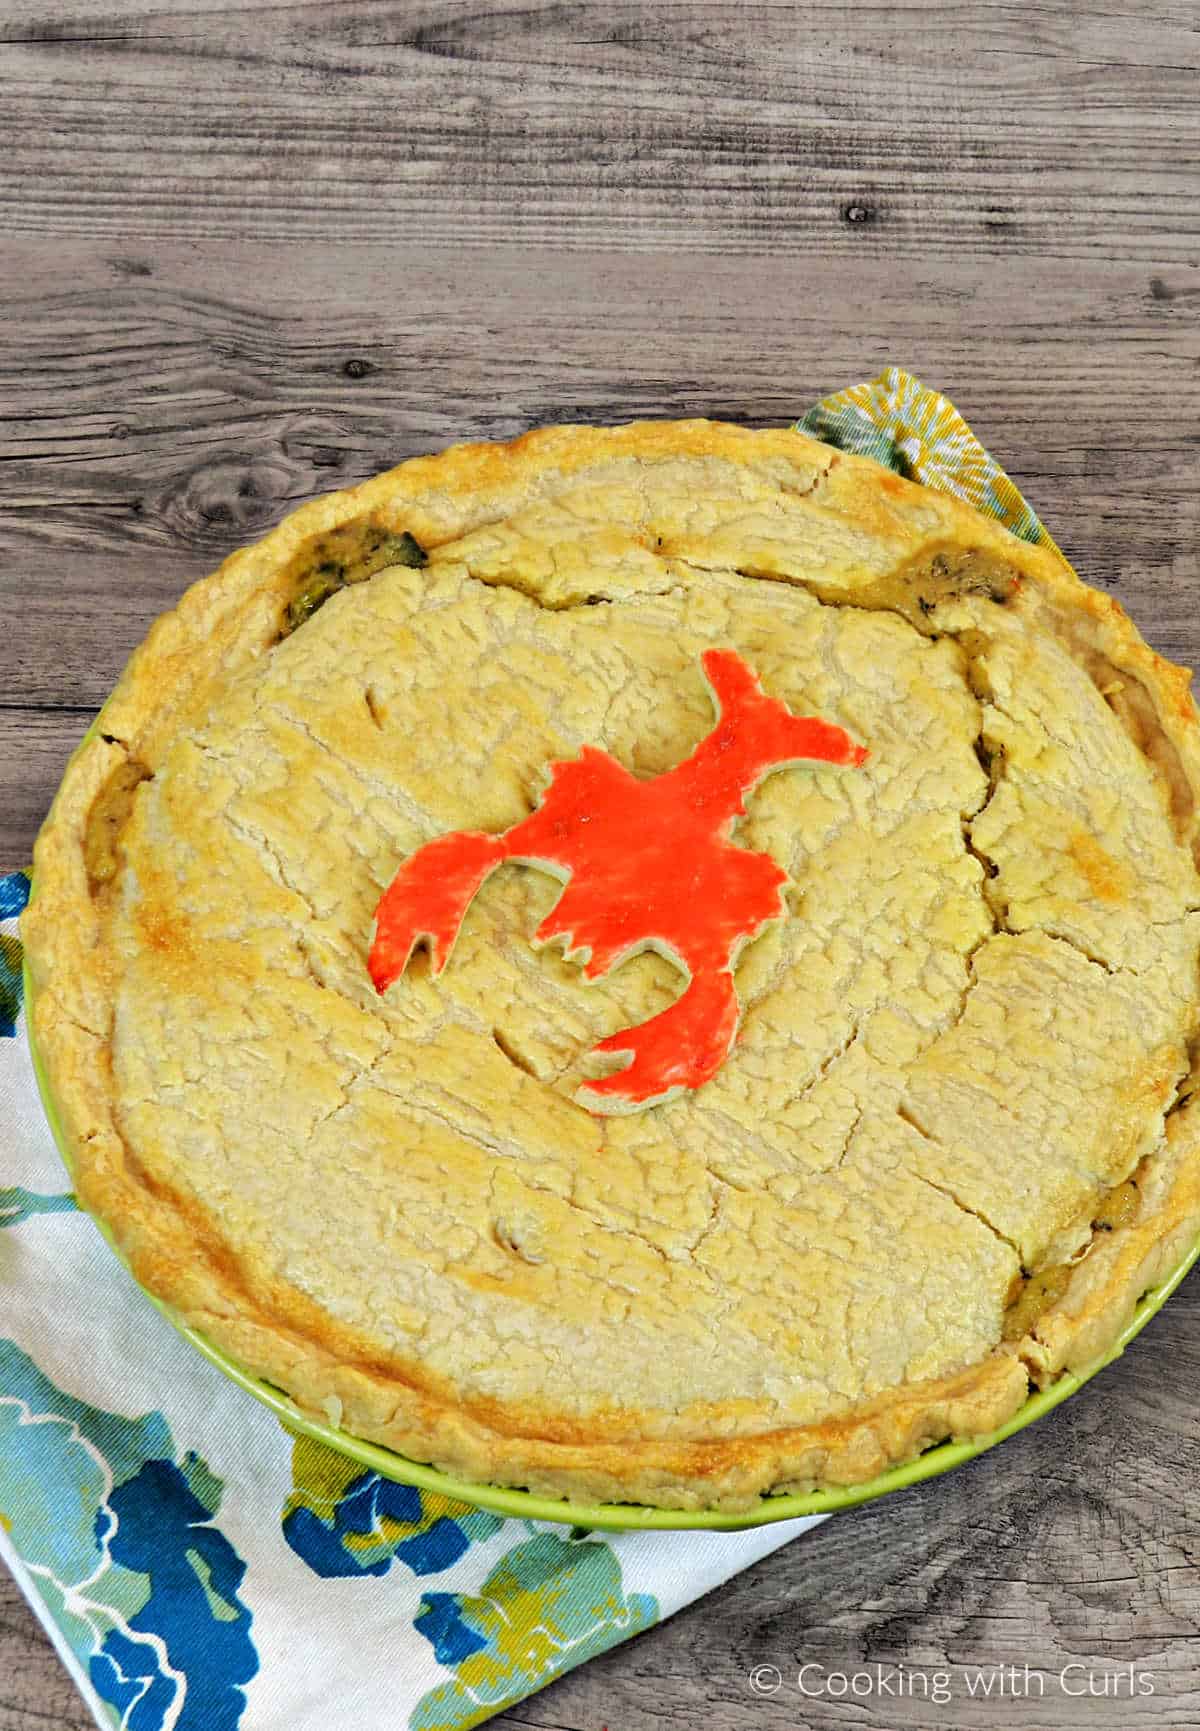 Looking down on a Lobster Pot Pie Pie with a cute red painted lobster cookie on top.